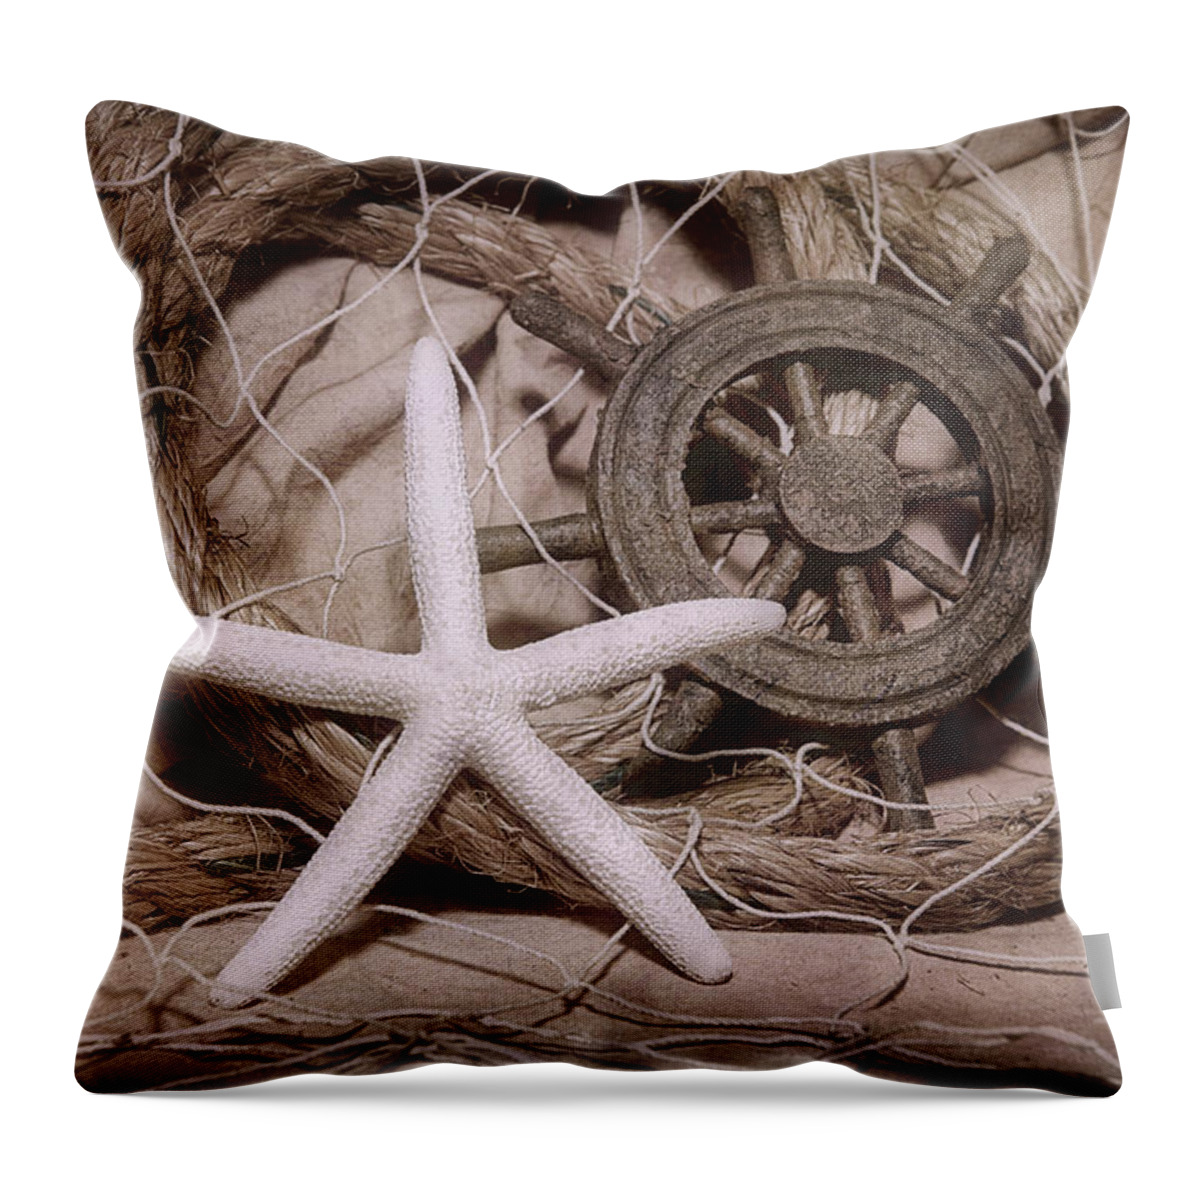 Boating Throw Pillow featuring the photograph Starfish Still Life by Tom Mc Nemar